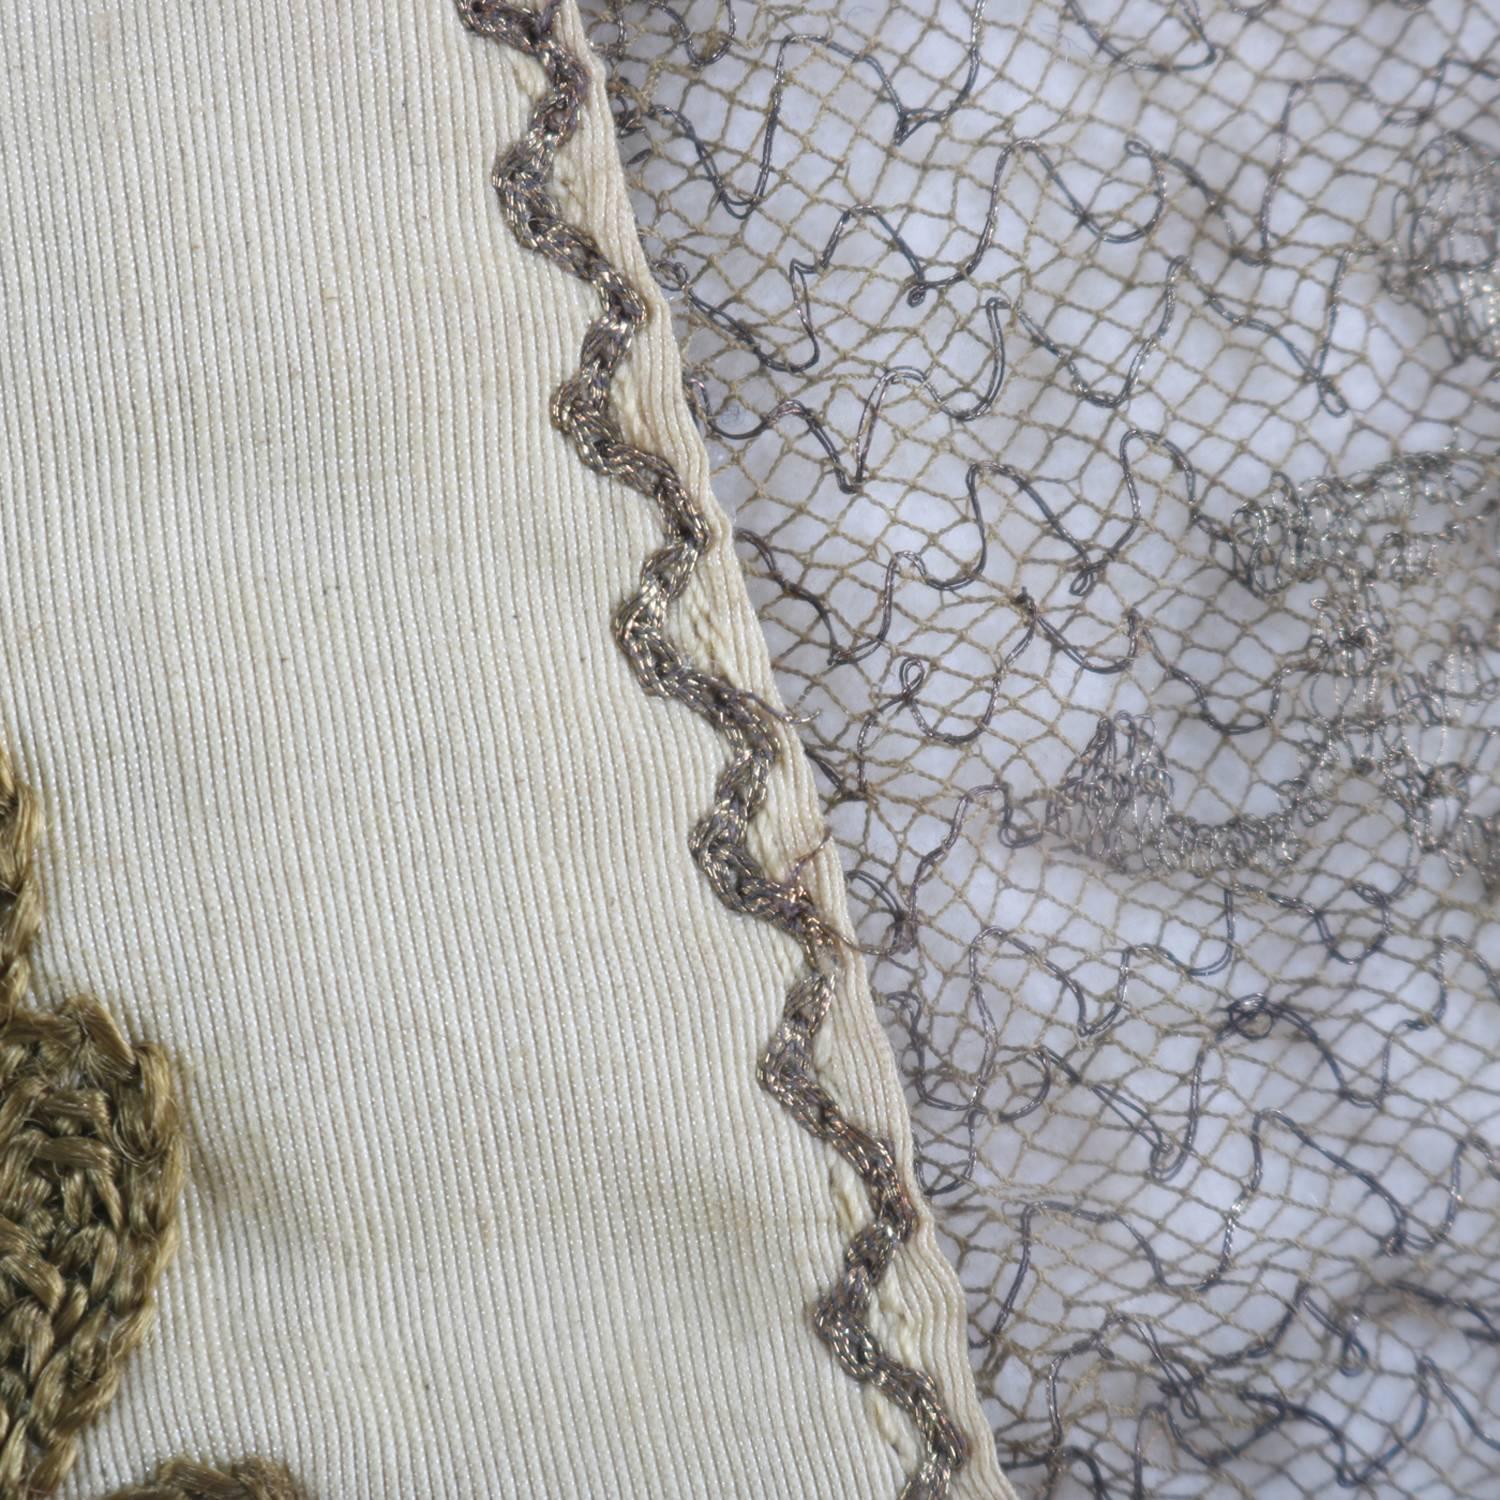 Antique French Patriotic Embroidered Souvenir Linen with Lacework, 19th Century 11